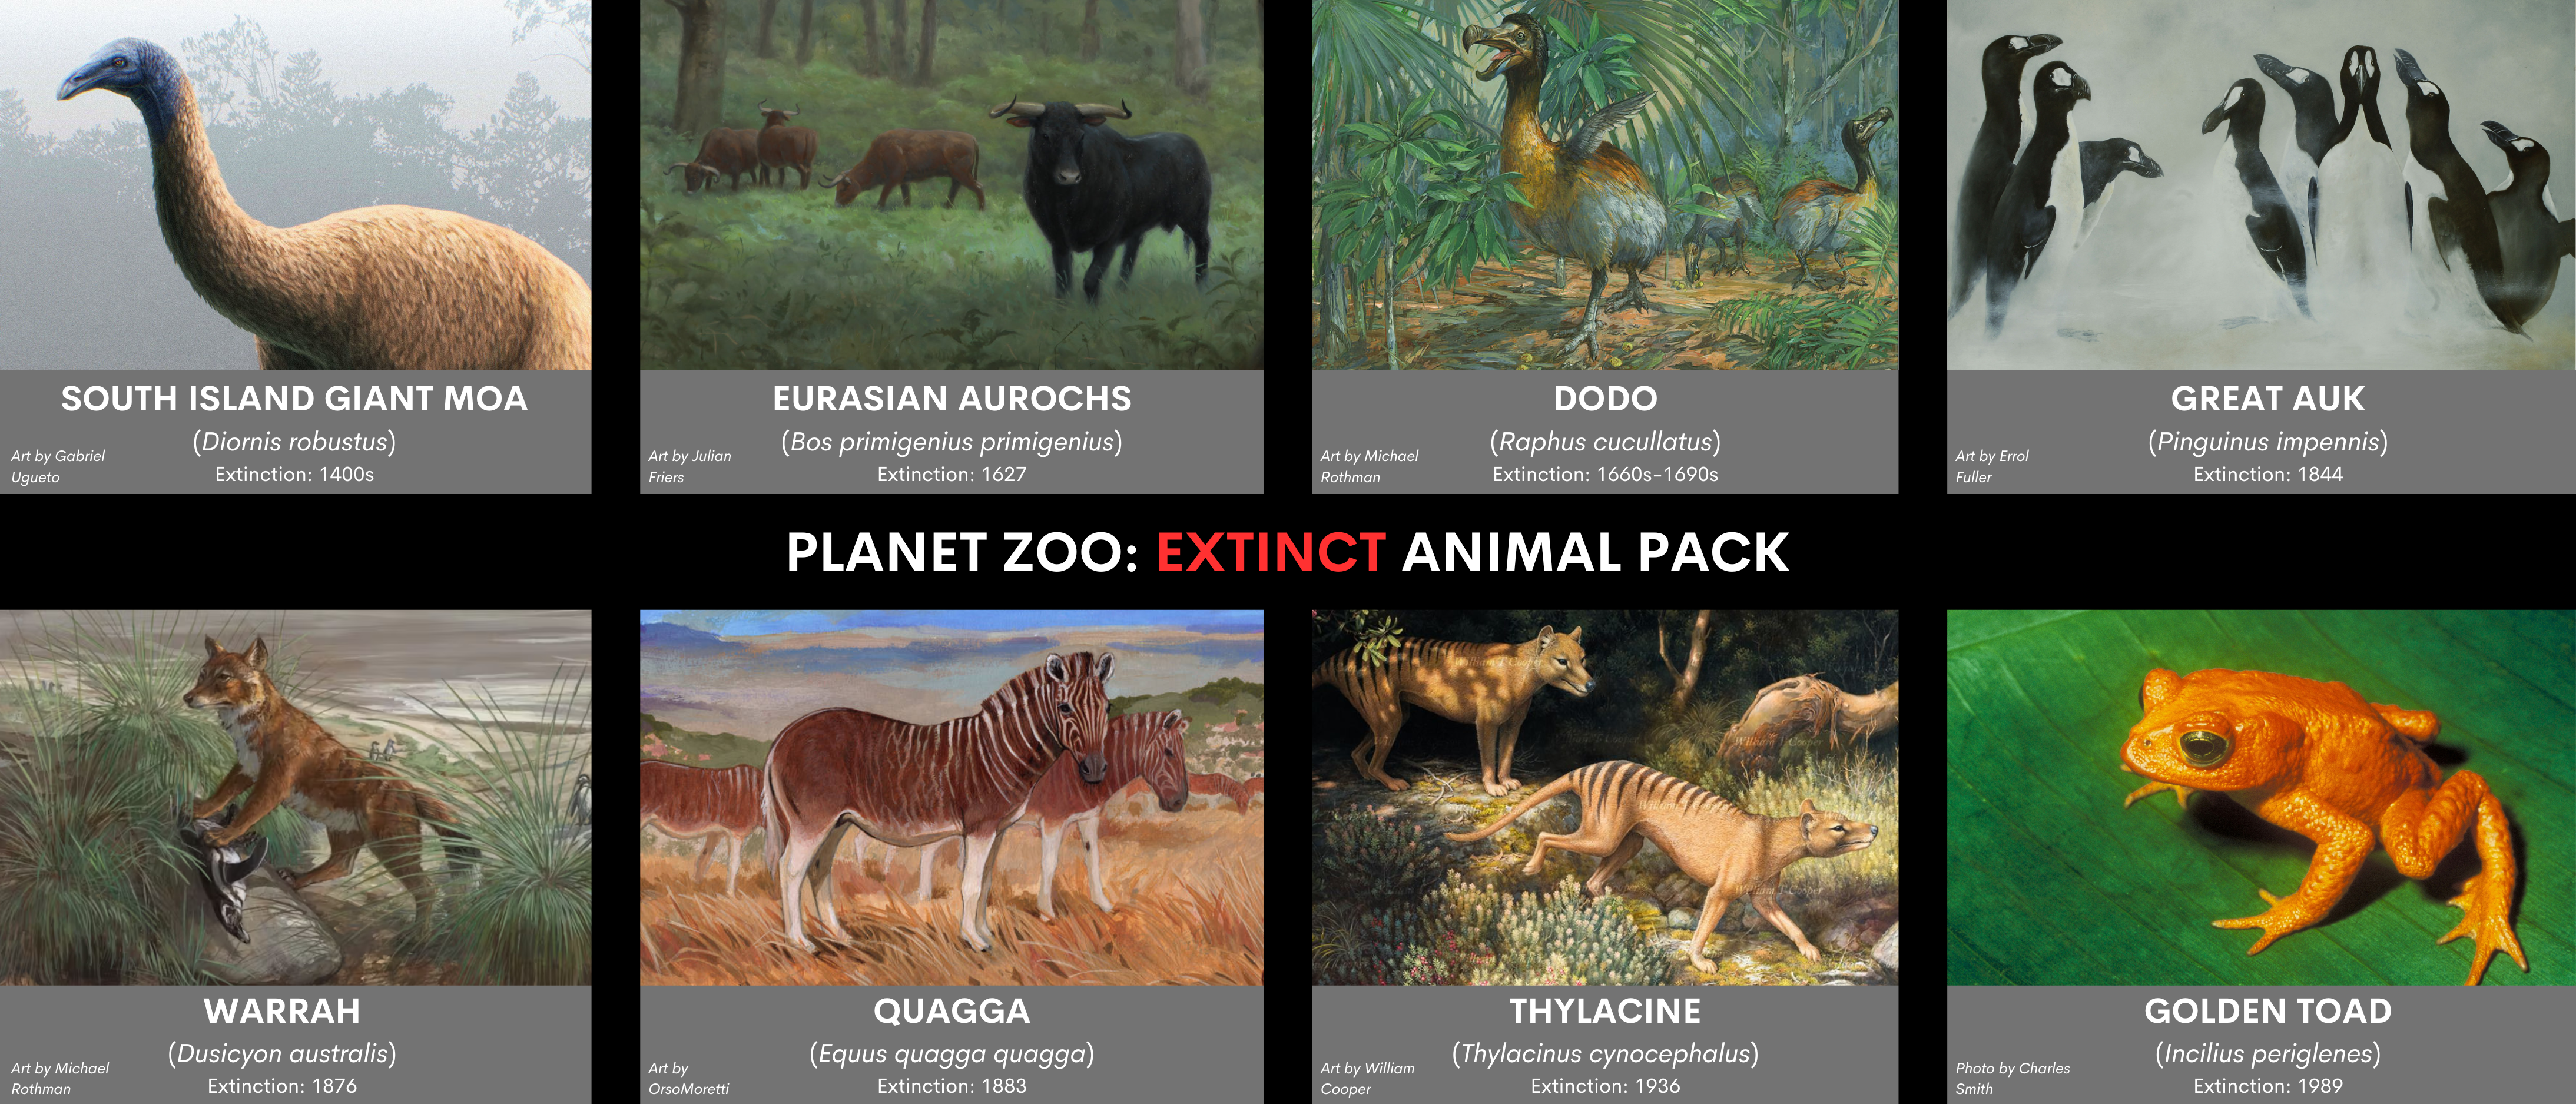 PLANET%20ZOO%20EXTINCT%20ANIMAL%20PACK.png